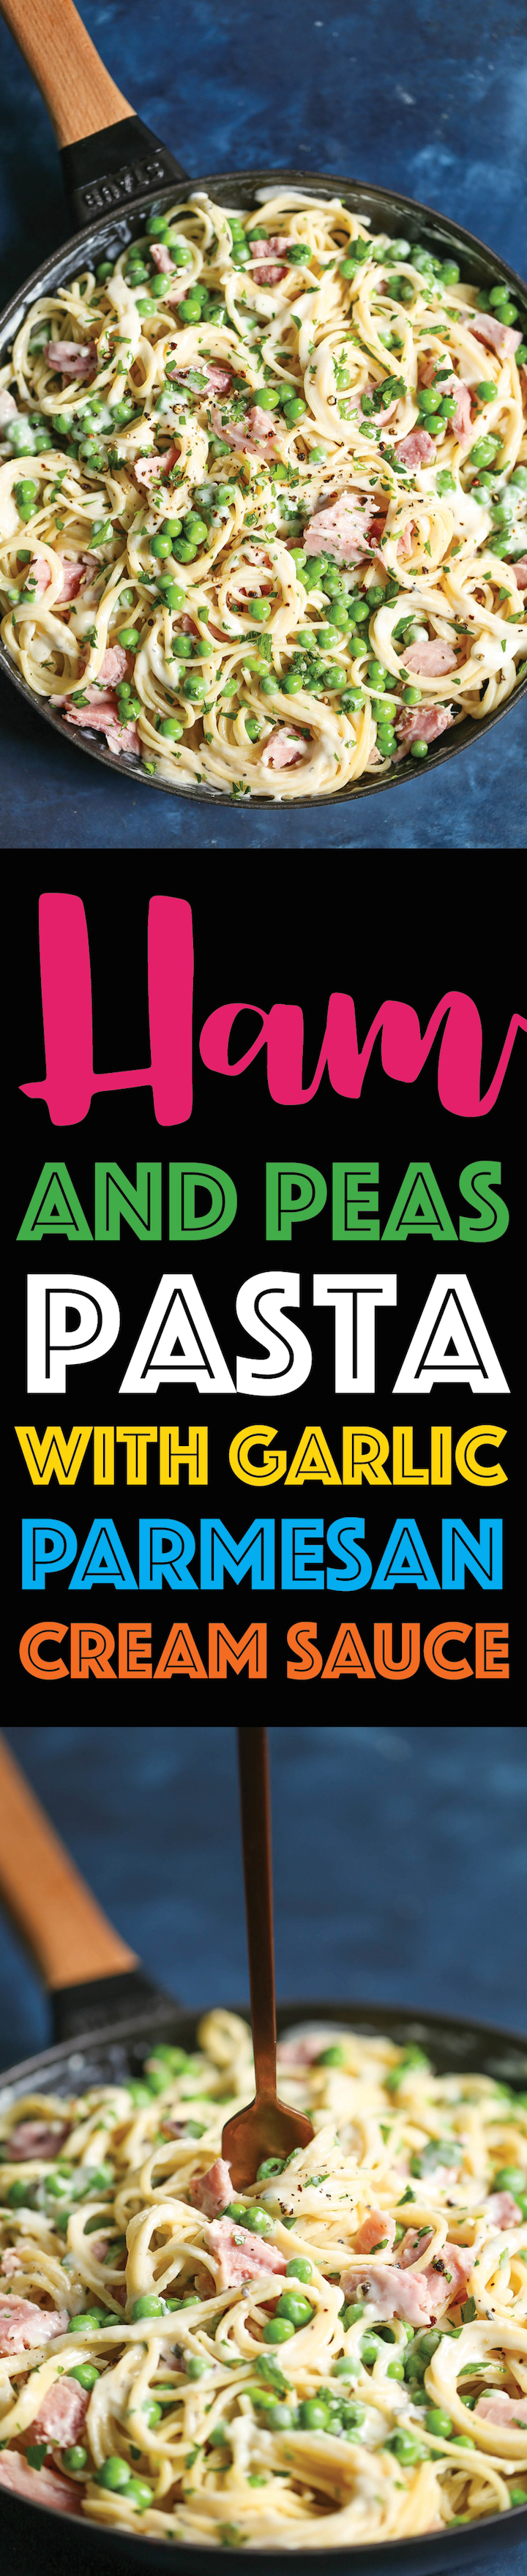 Ham and Peas Pasta with Garlic Parmesan Cream Sauce - The perfect way to use up all your leftover ham! It is amazingly creamy, comforting and kid-friendly!